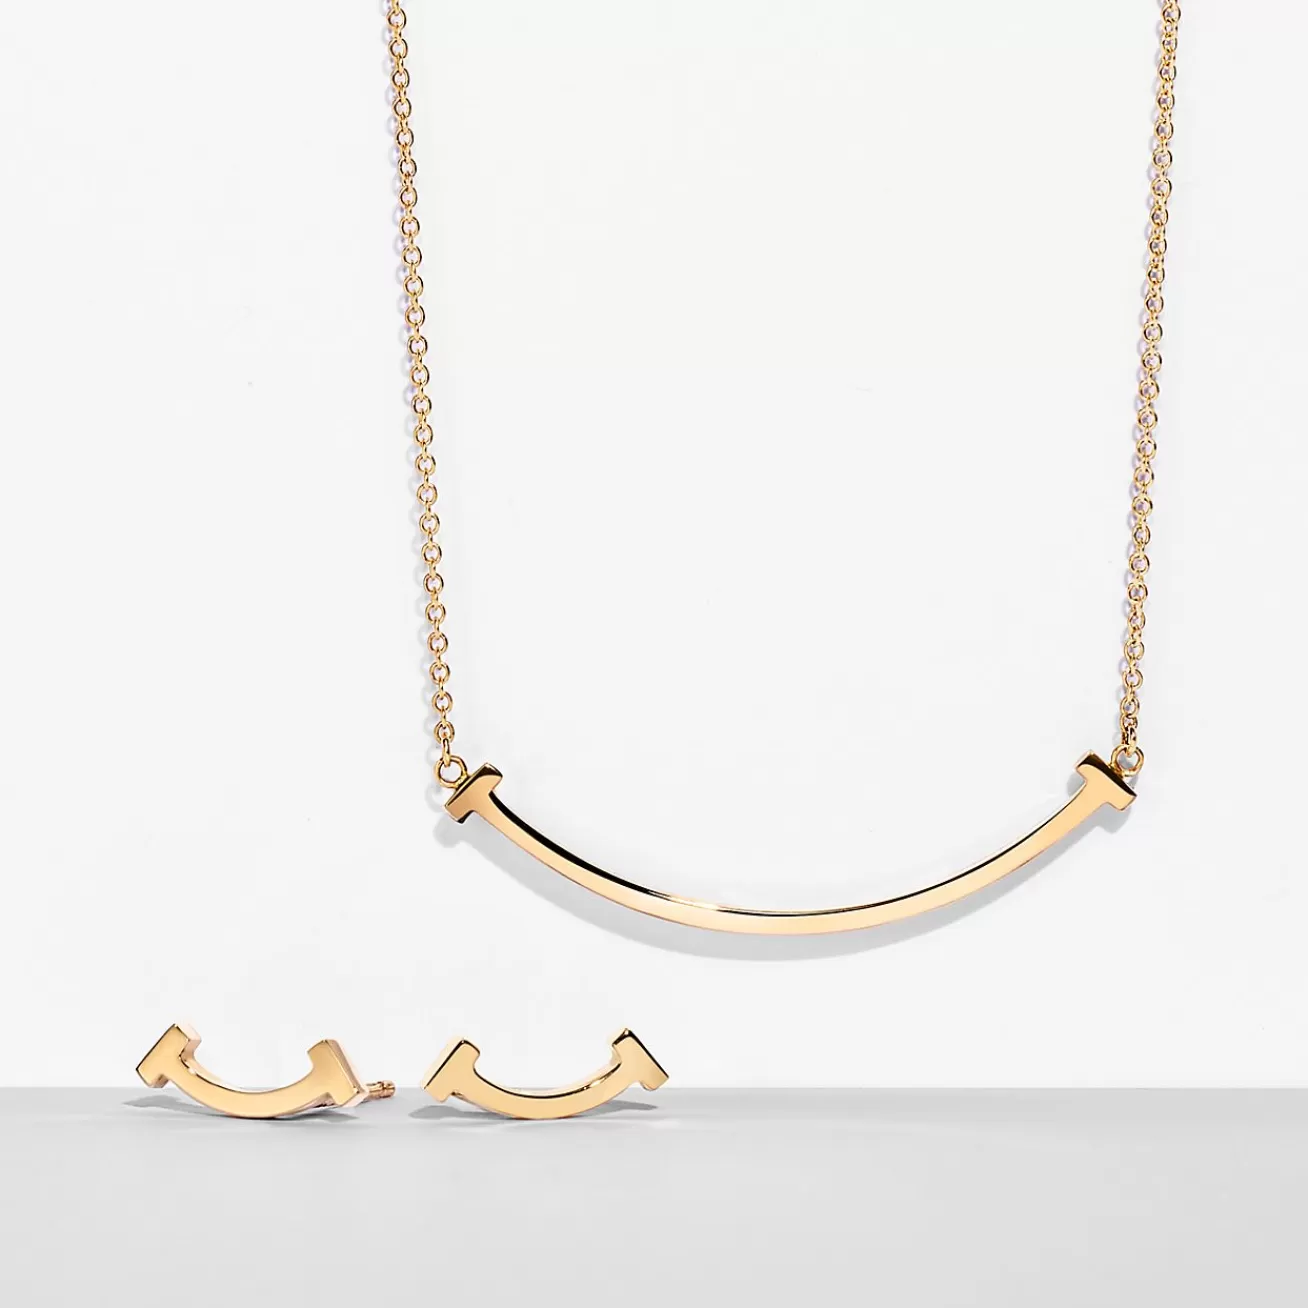 Tiffany & Co. Tiffany T Smile Pendant and Earrings Set in Yellow Gold | ^ Gifts for Her | Her